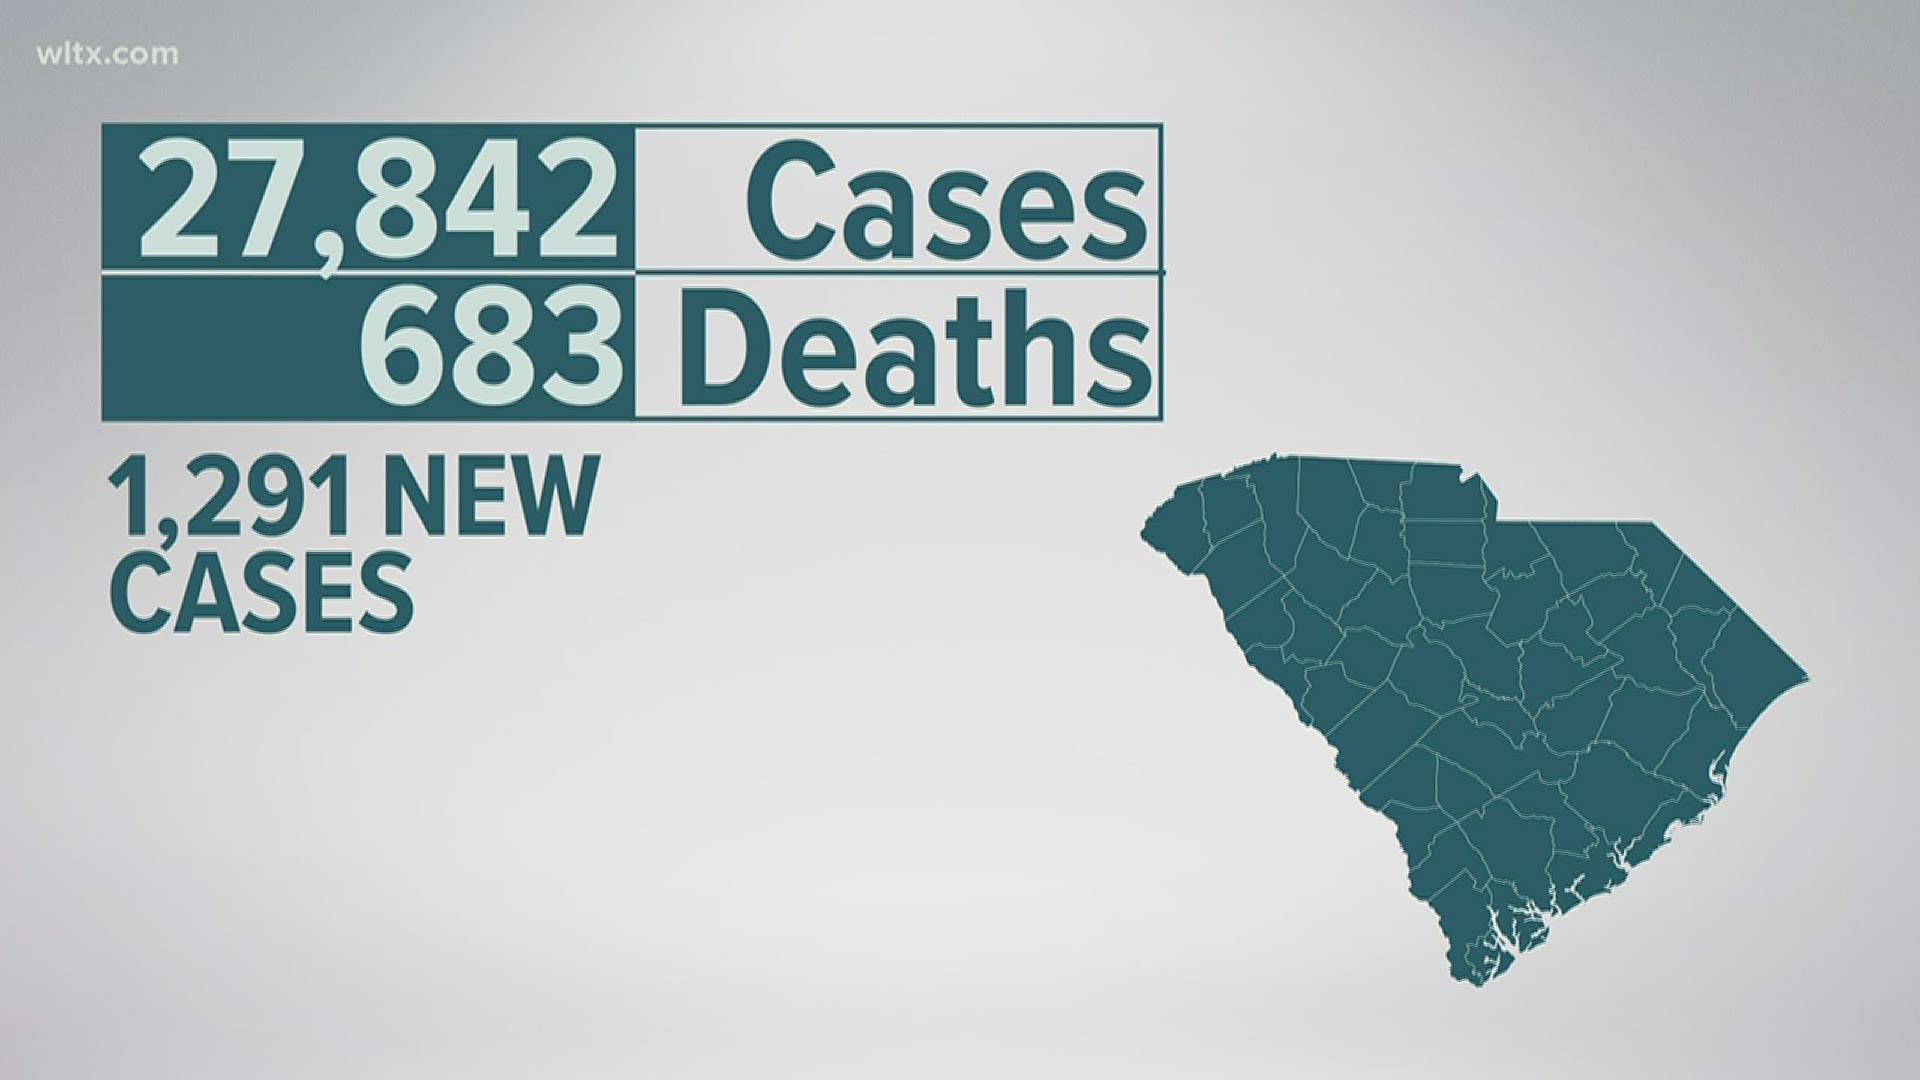 This brings the total number of people confirmed cases to 28,962, probable cases to 60, confirmed deaths to 691, and probable deaths to two.